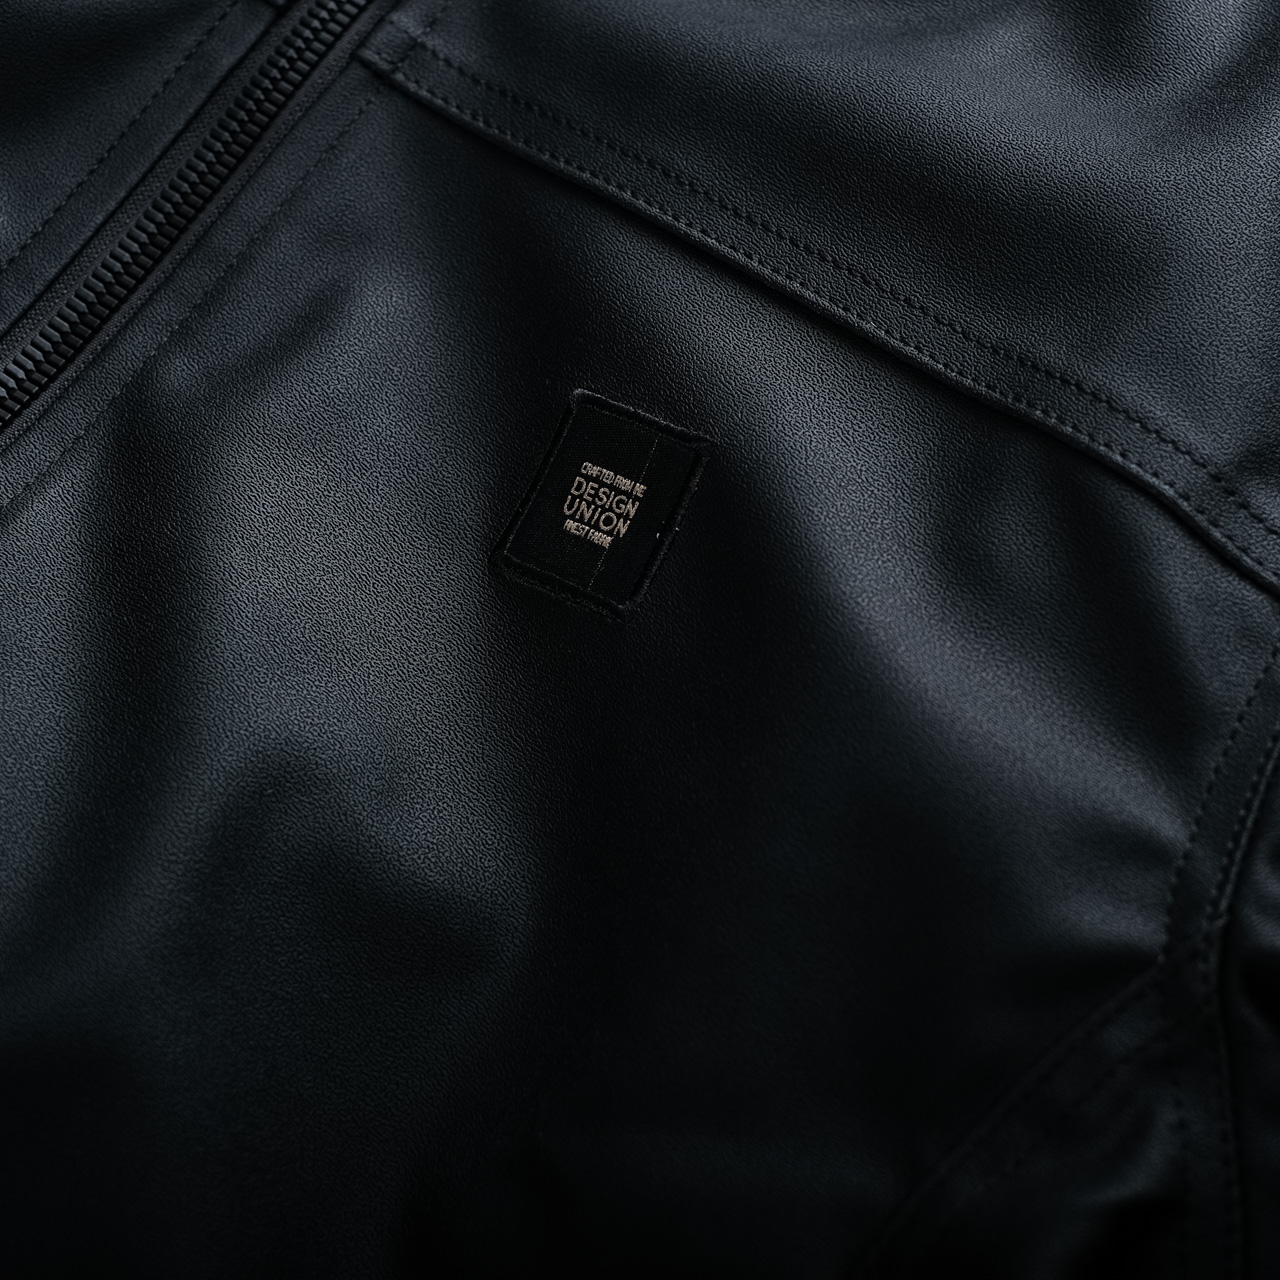 Night Bomber Black “SPECIAL MATERIAL” – SIXPAX